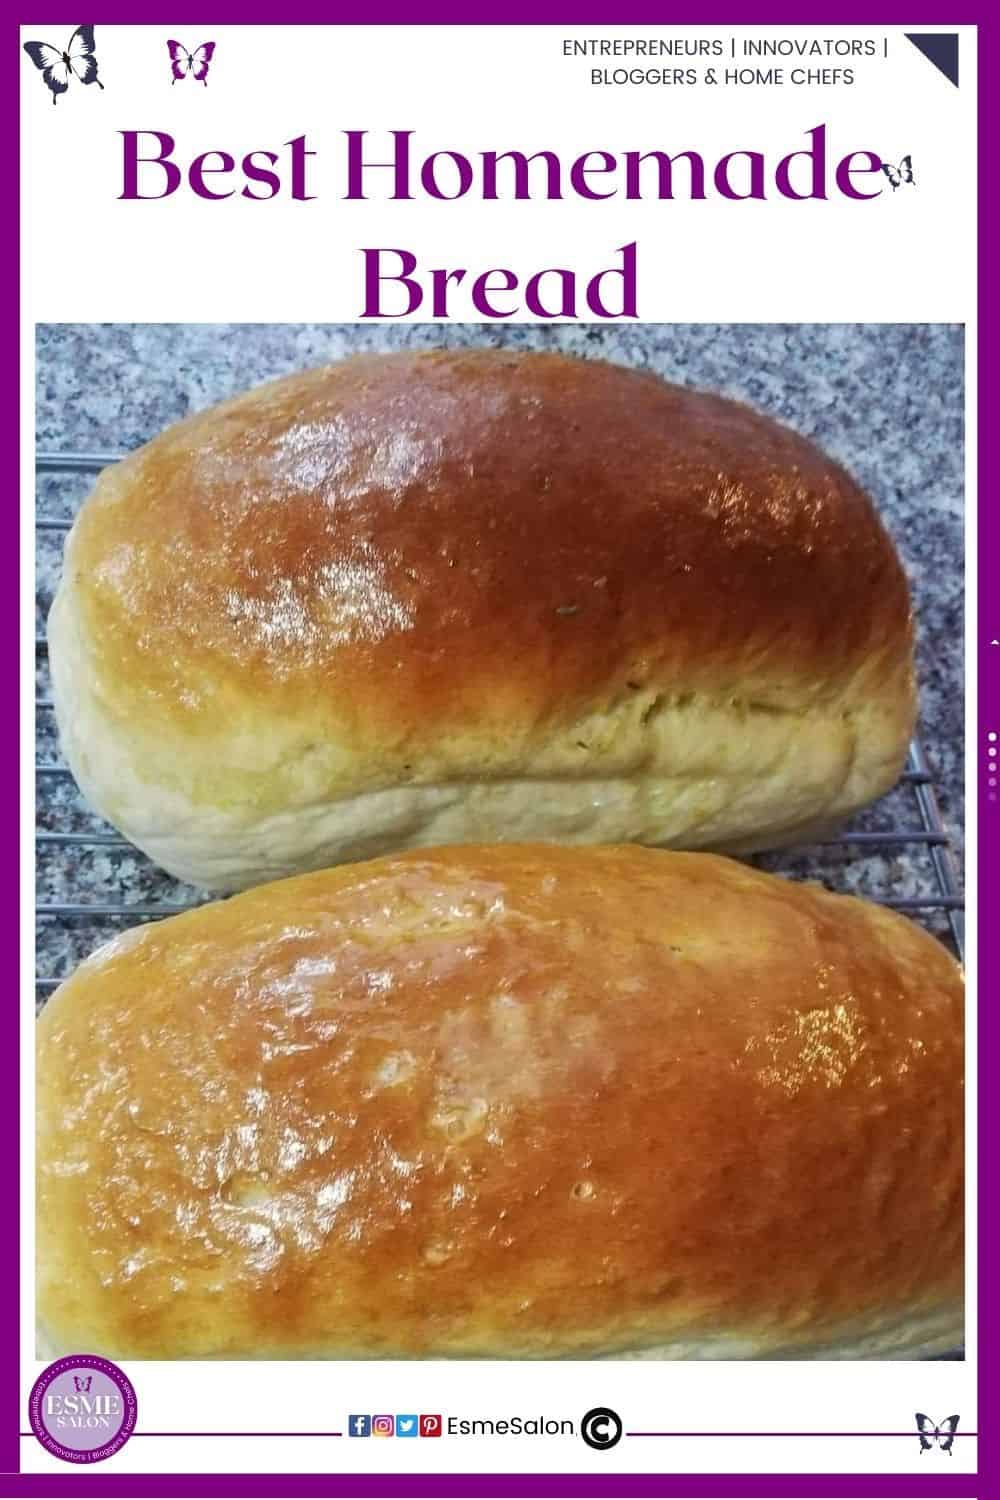 an image of two of the Best Homemade Breads available